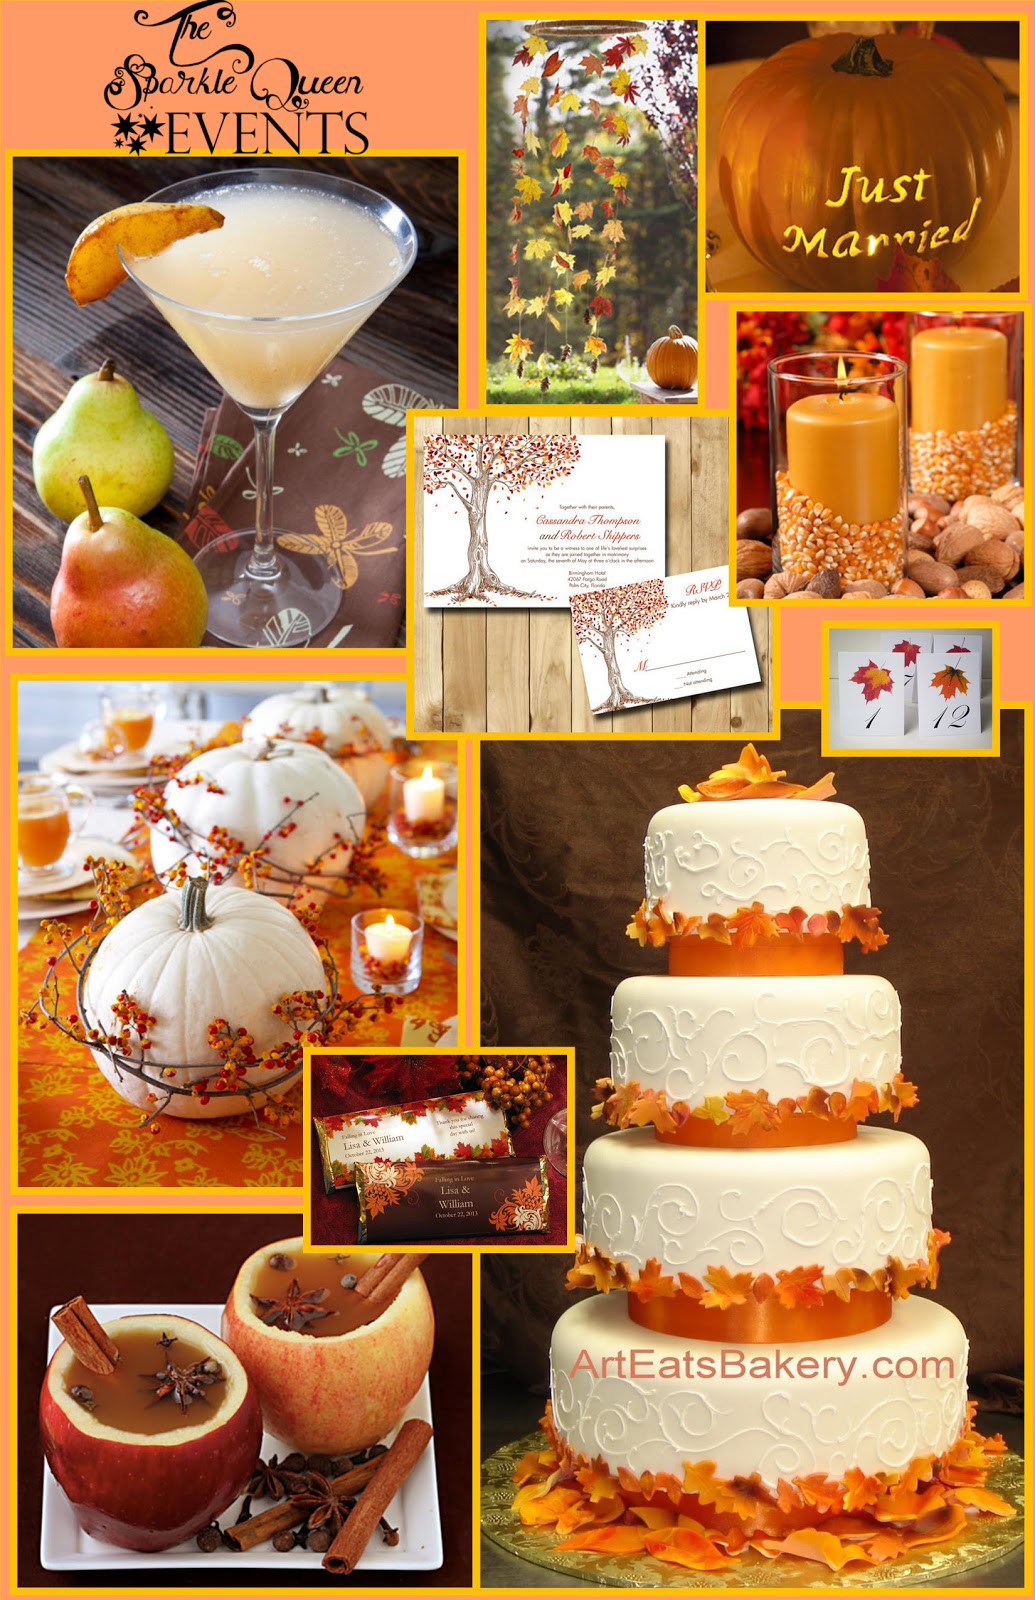 beautiful simple wedding cake Simple and Elegant Fall Wedding by The Sparkle Queen Events